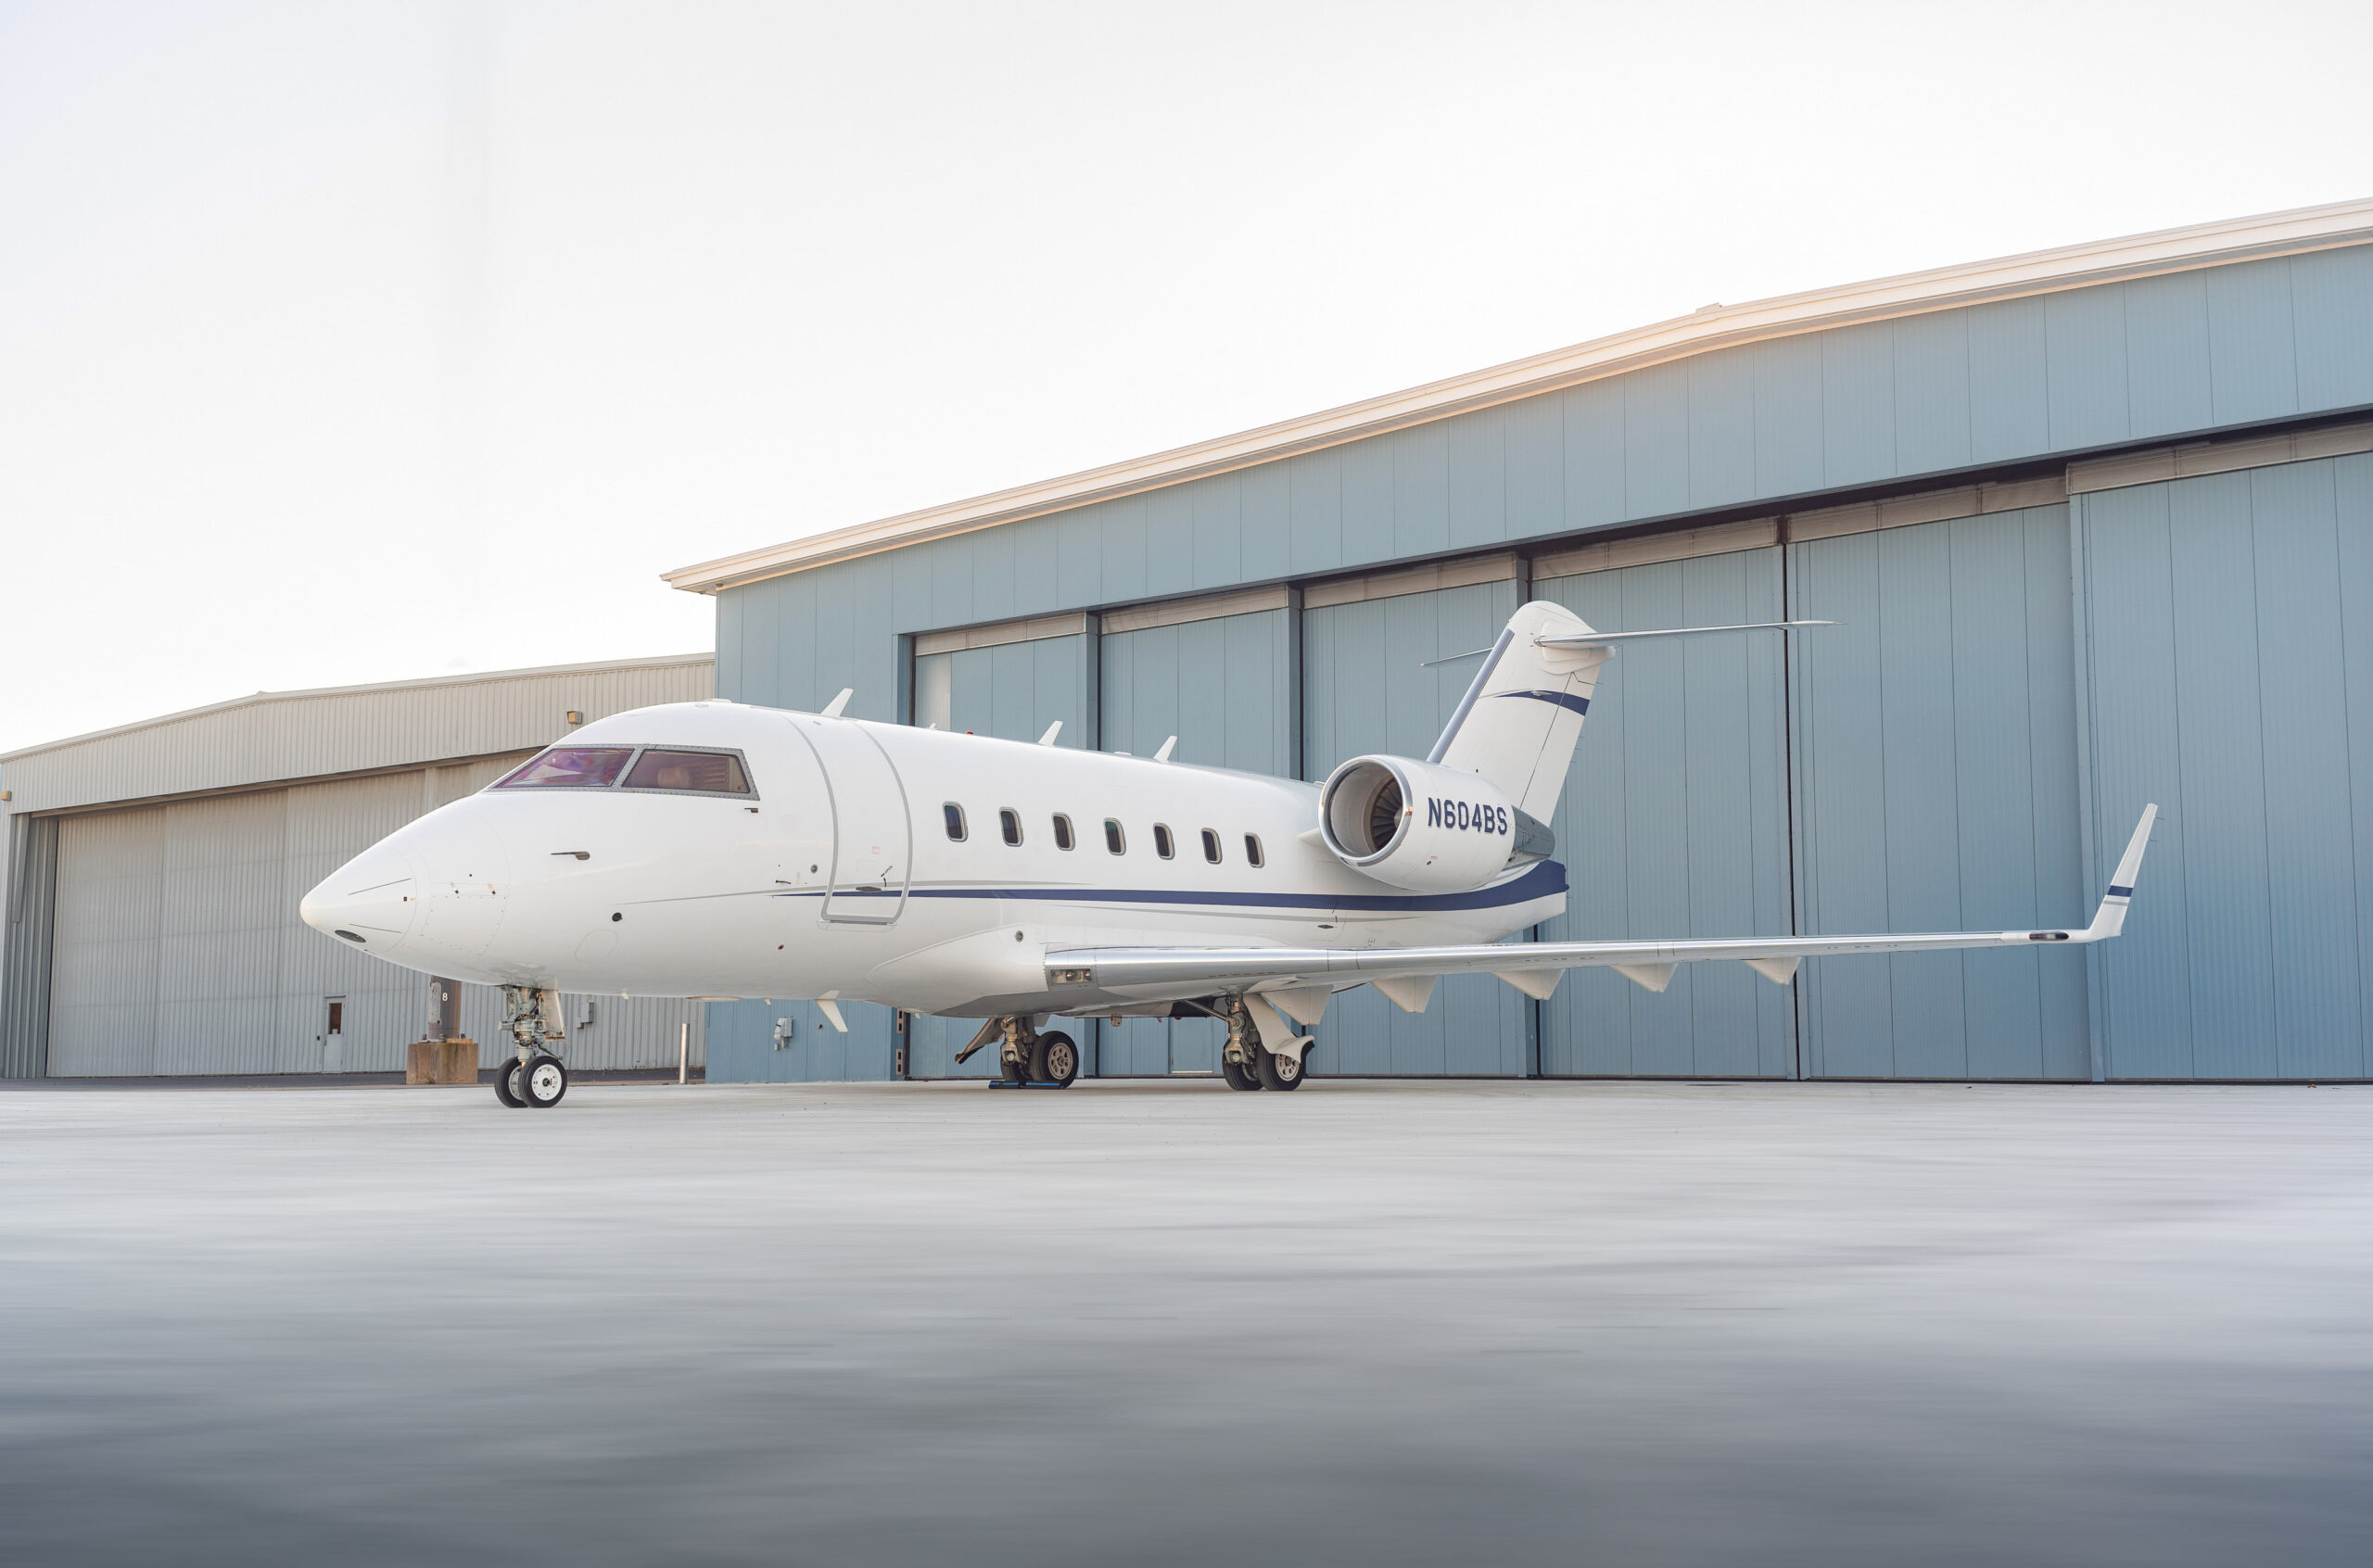 2003 Bombardier Challenger 604 for sale 2560x1700